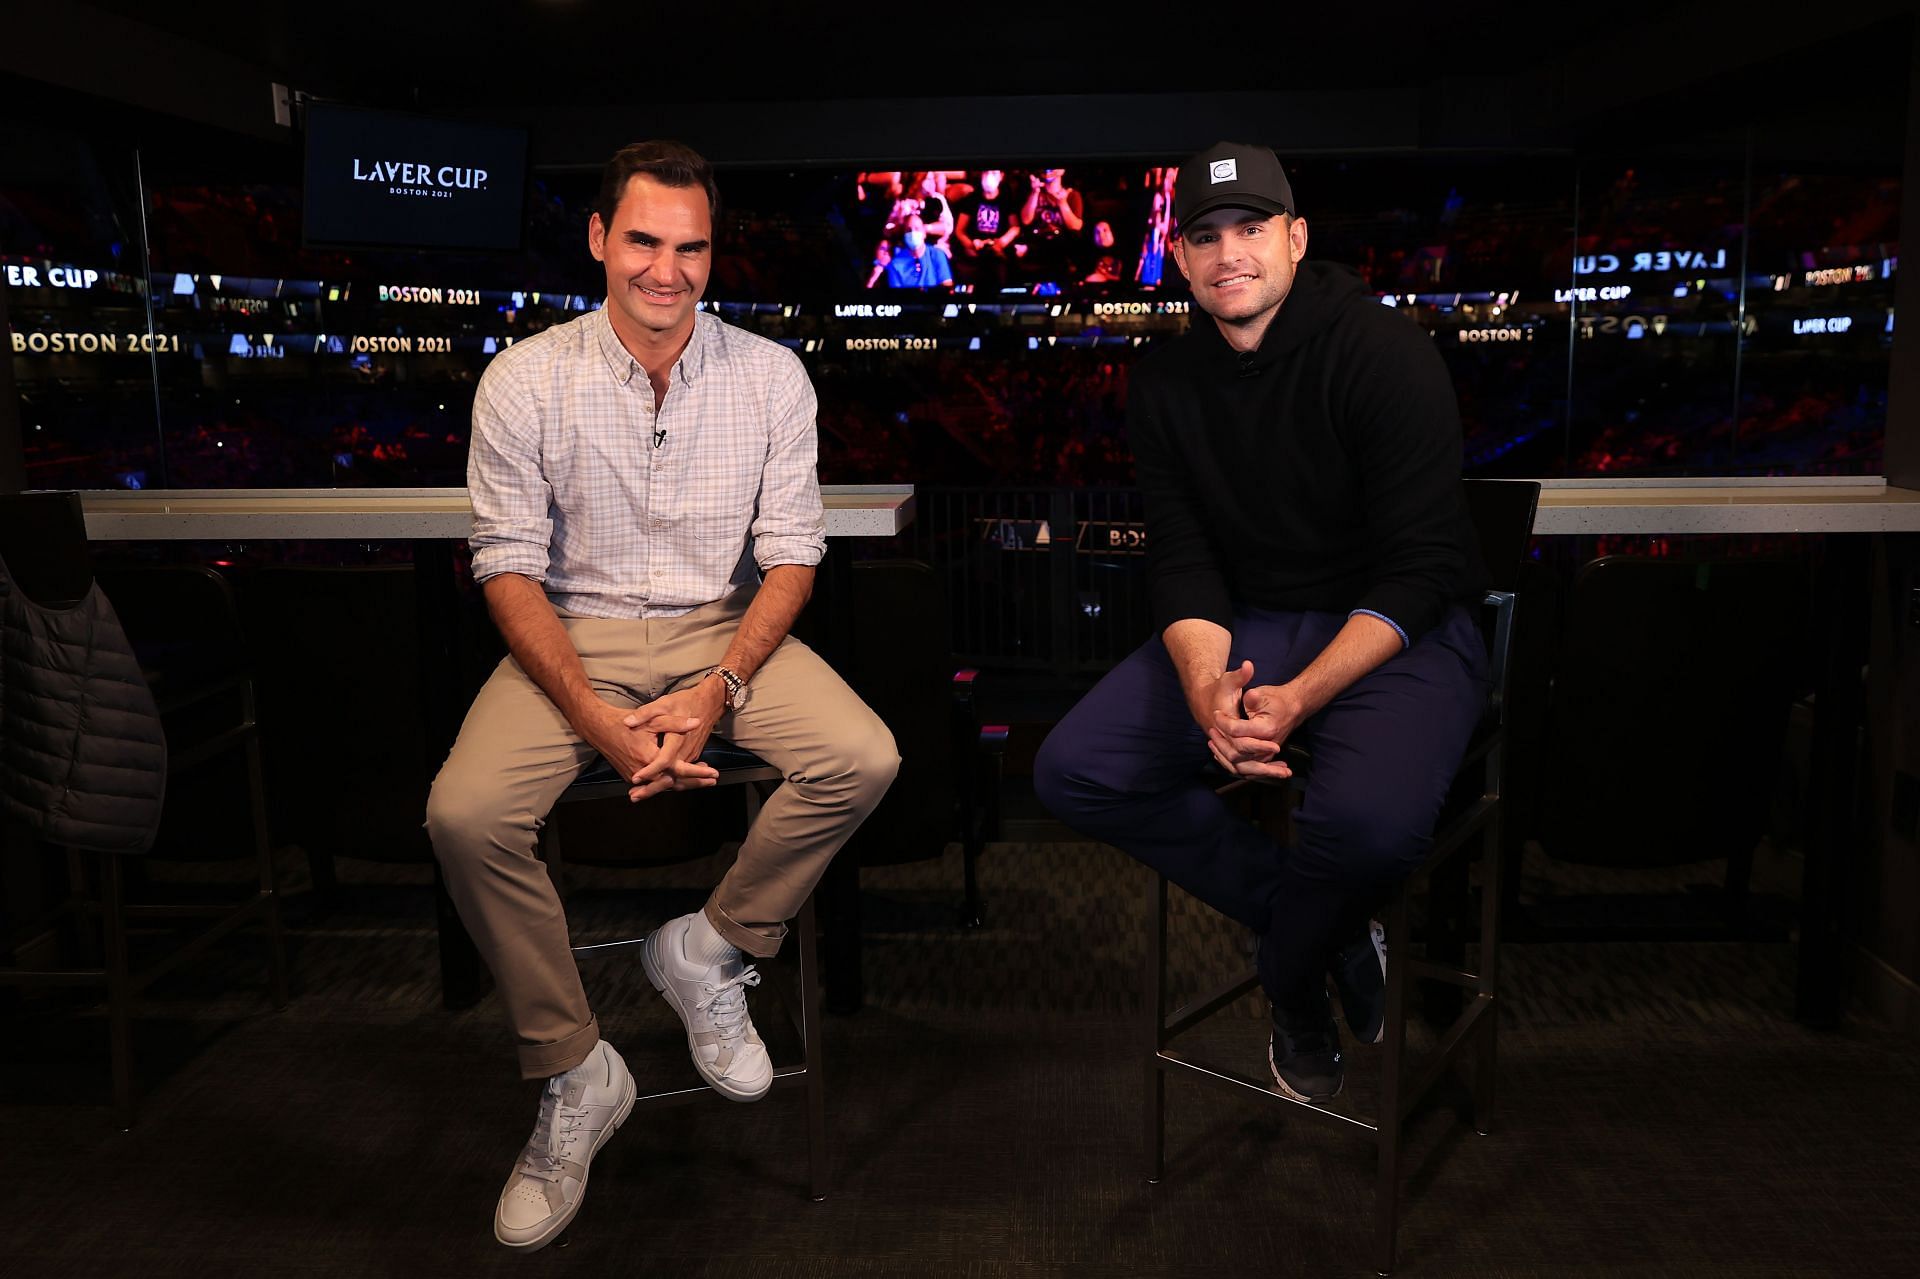 Roger Federer and Andy Roddick pose on Day 2 of the 2021 Laver Cup at TD Garden